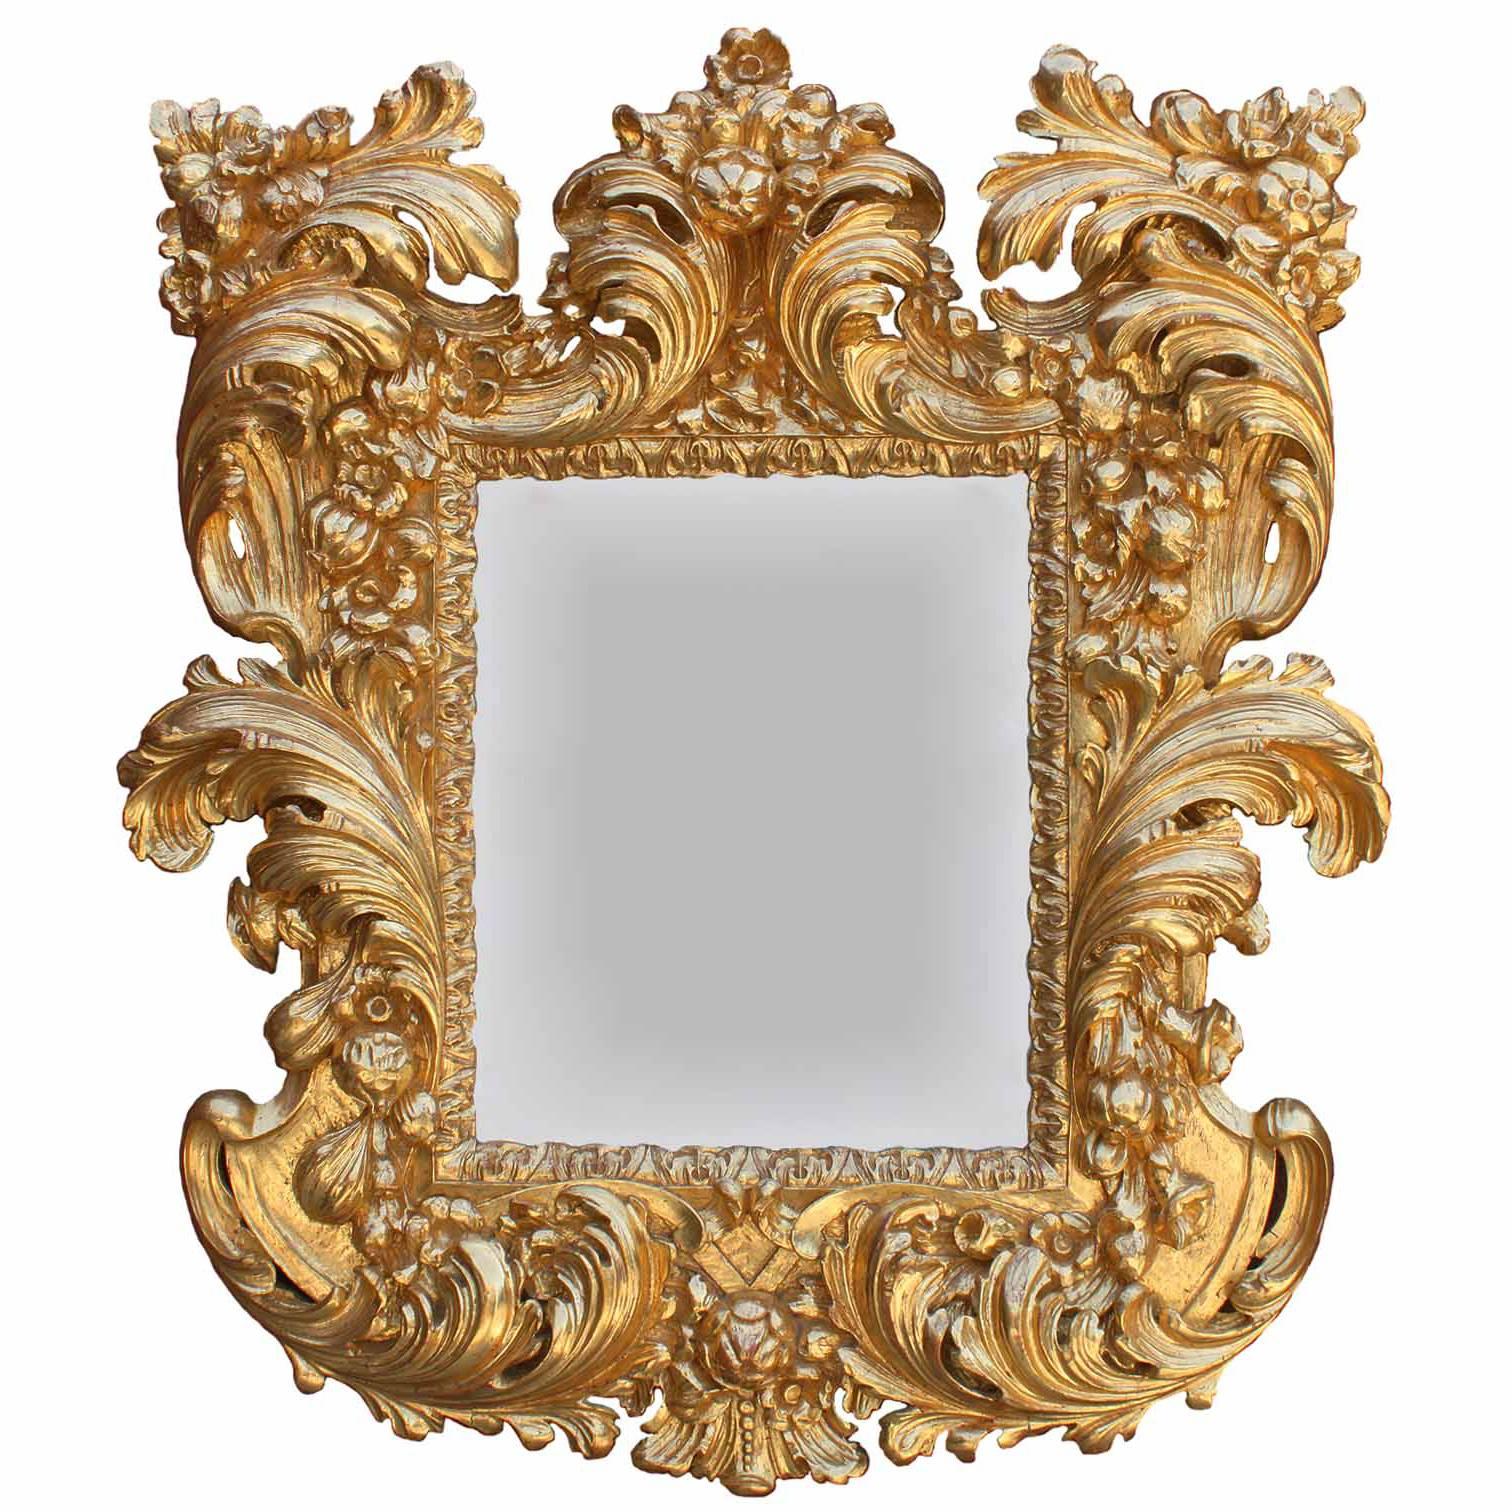 Palatial Italian 19th Century Baroque Style Giltwood Carved Florentine Mirror